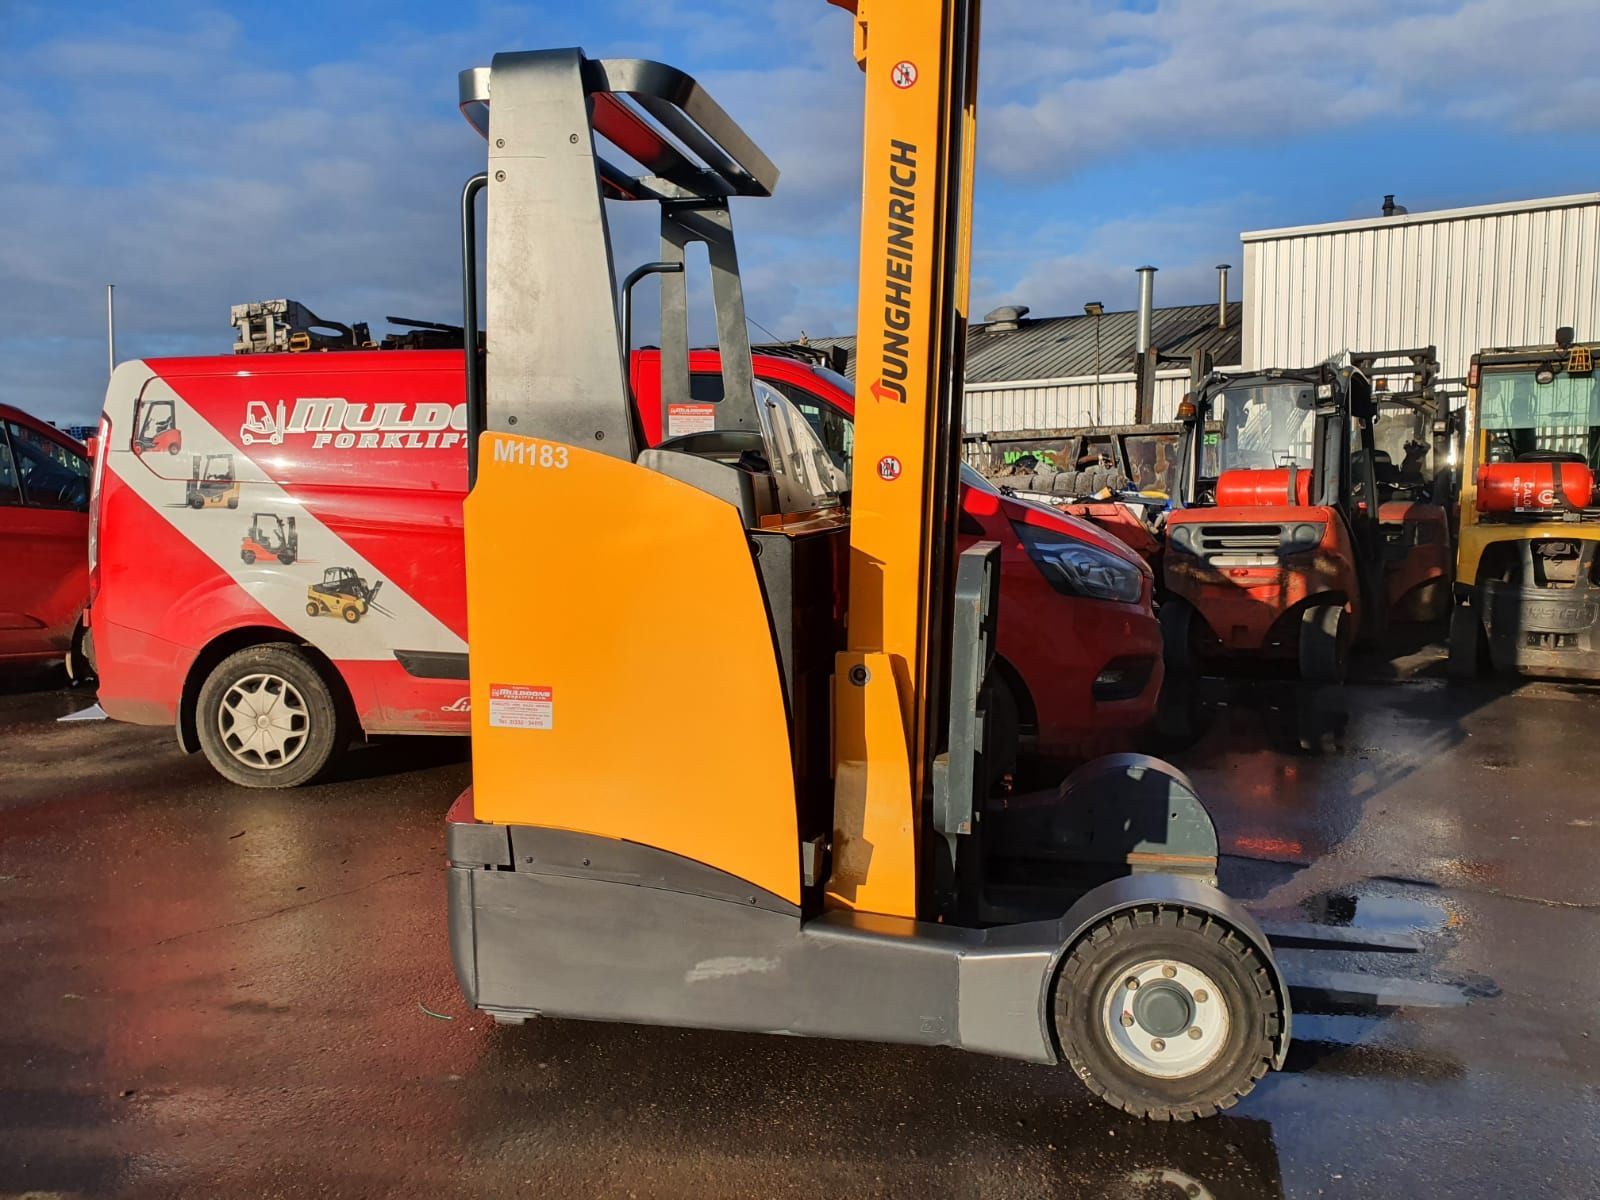 A 26-point check is carried out on all forklift trucks covering everything from hydraulic oil levels through to stretch measurements